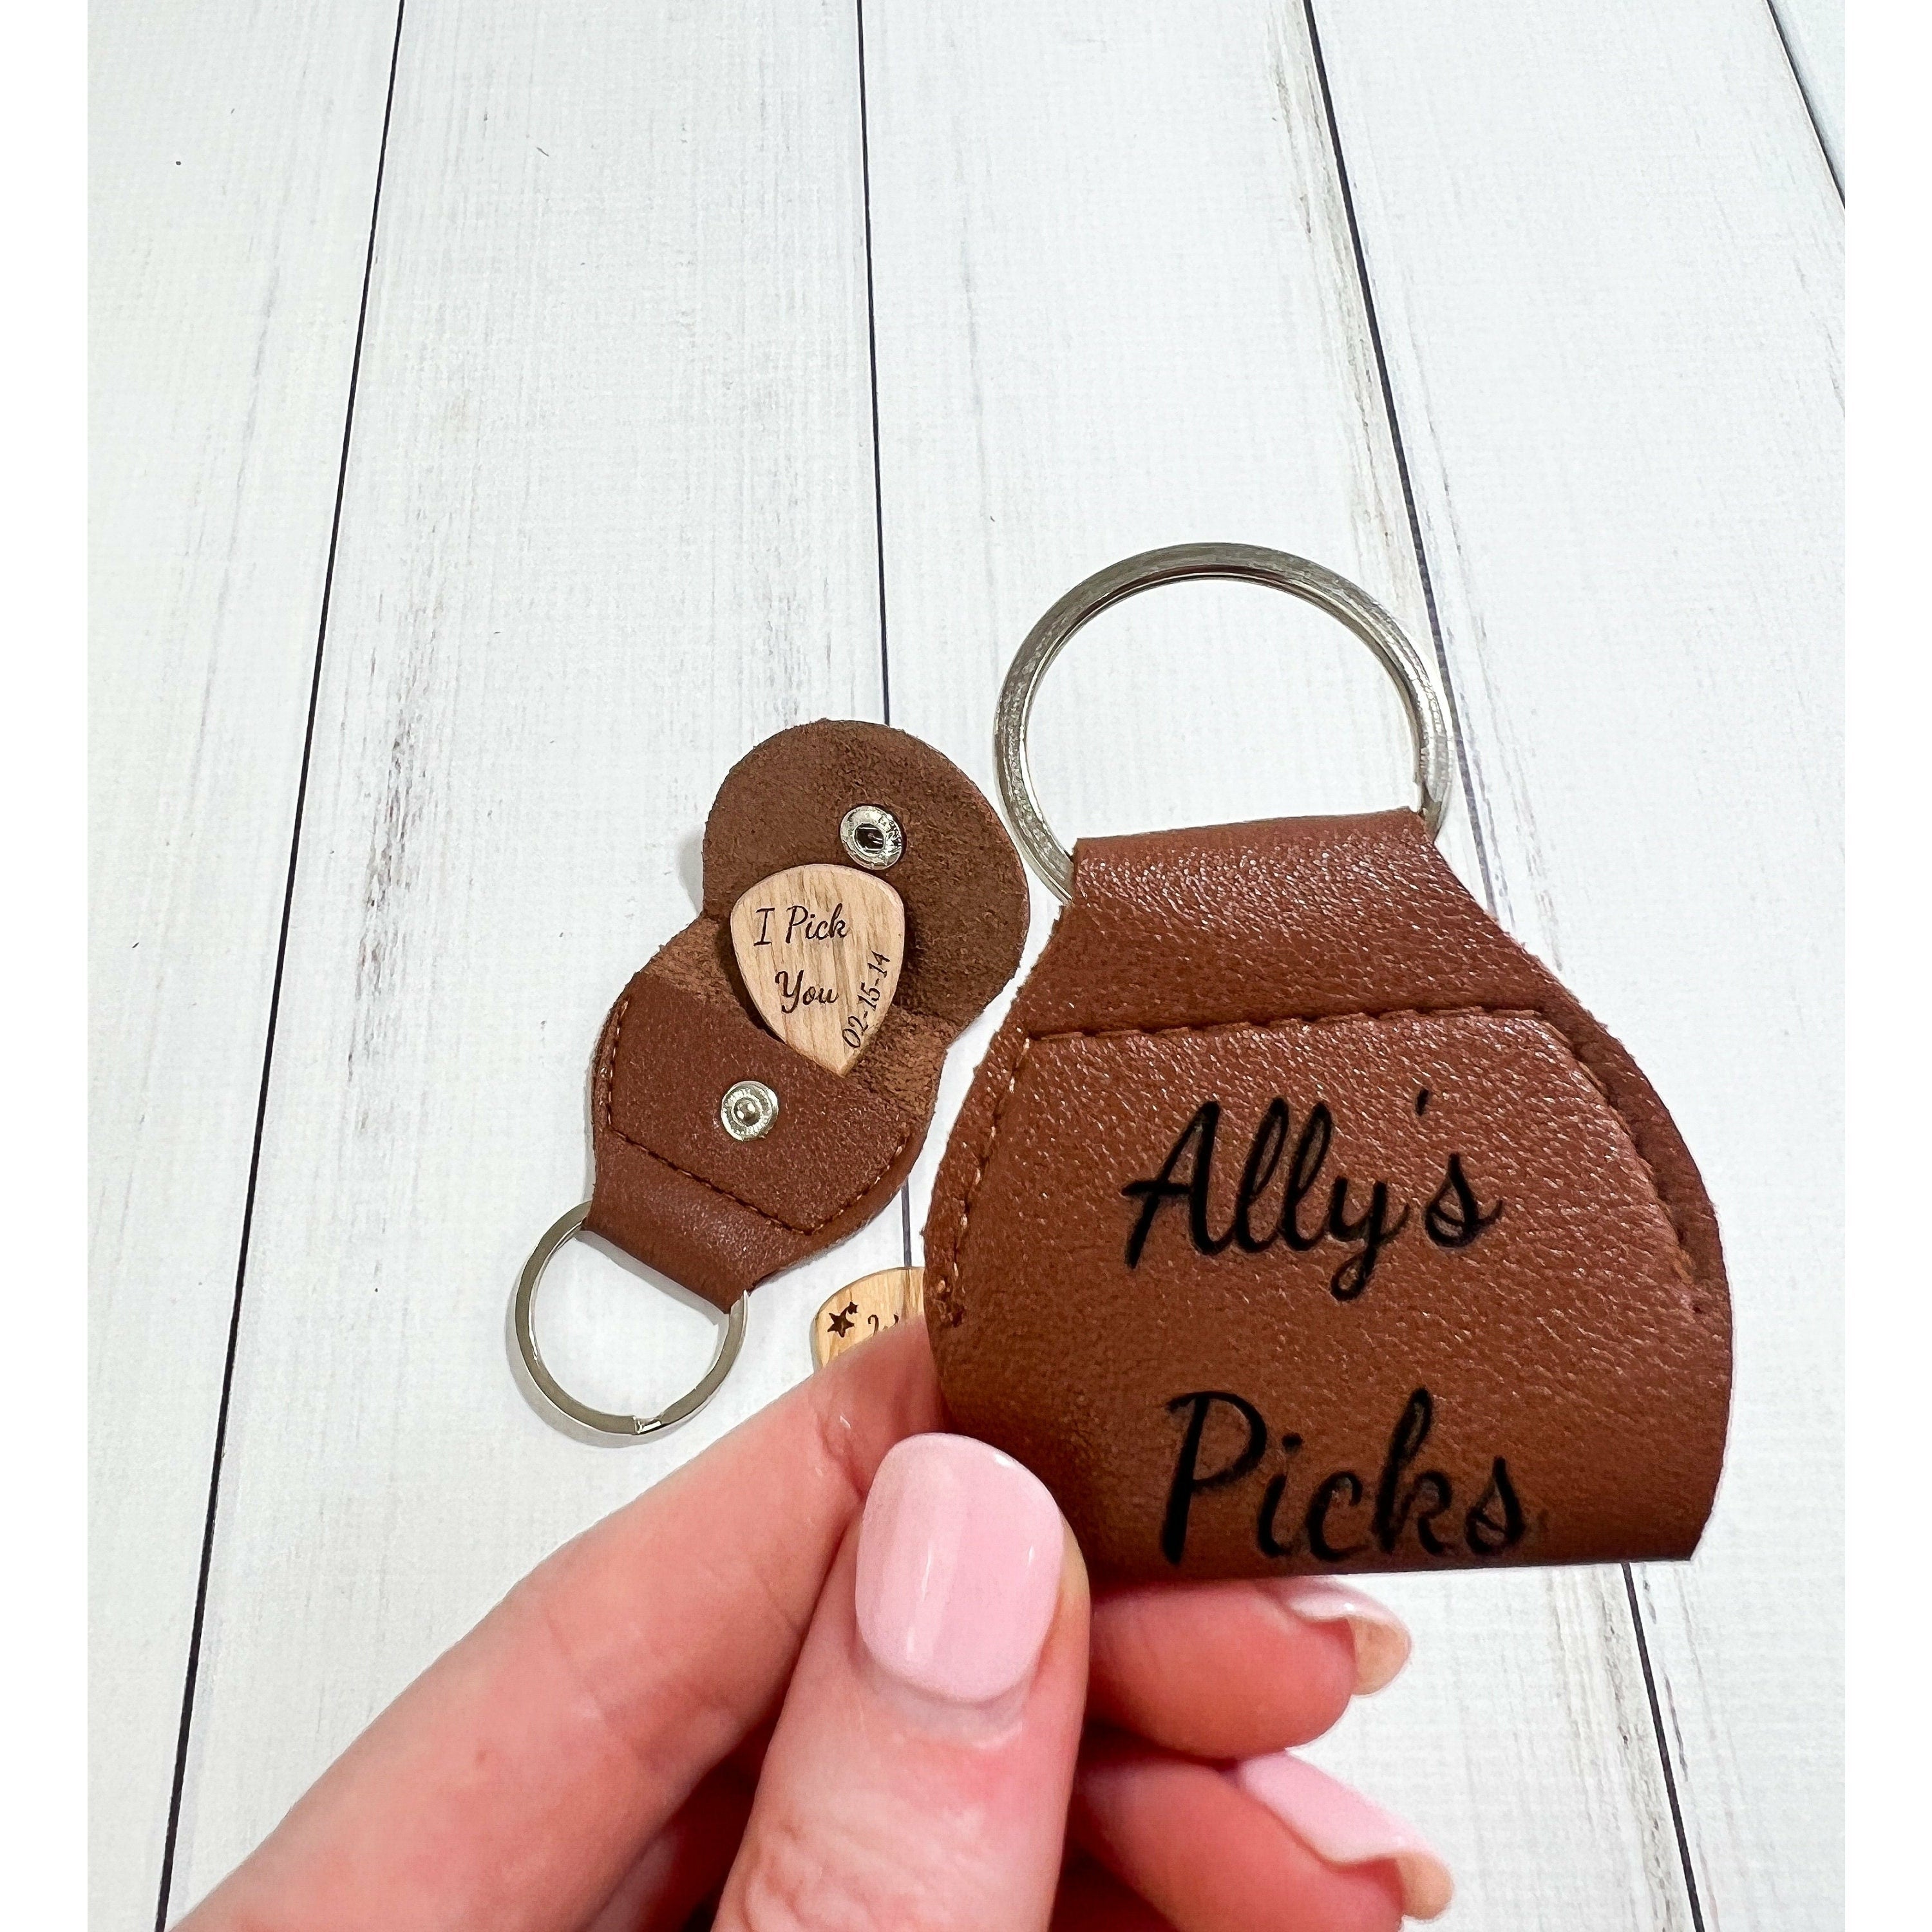 Custom Guitar Pick Holder With Personalized Guitar Pick